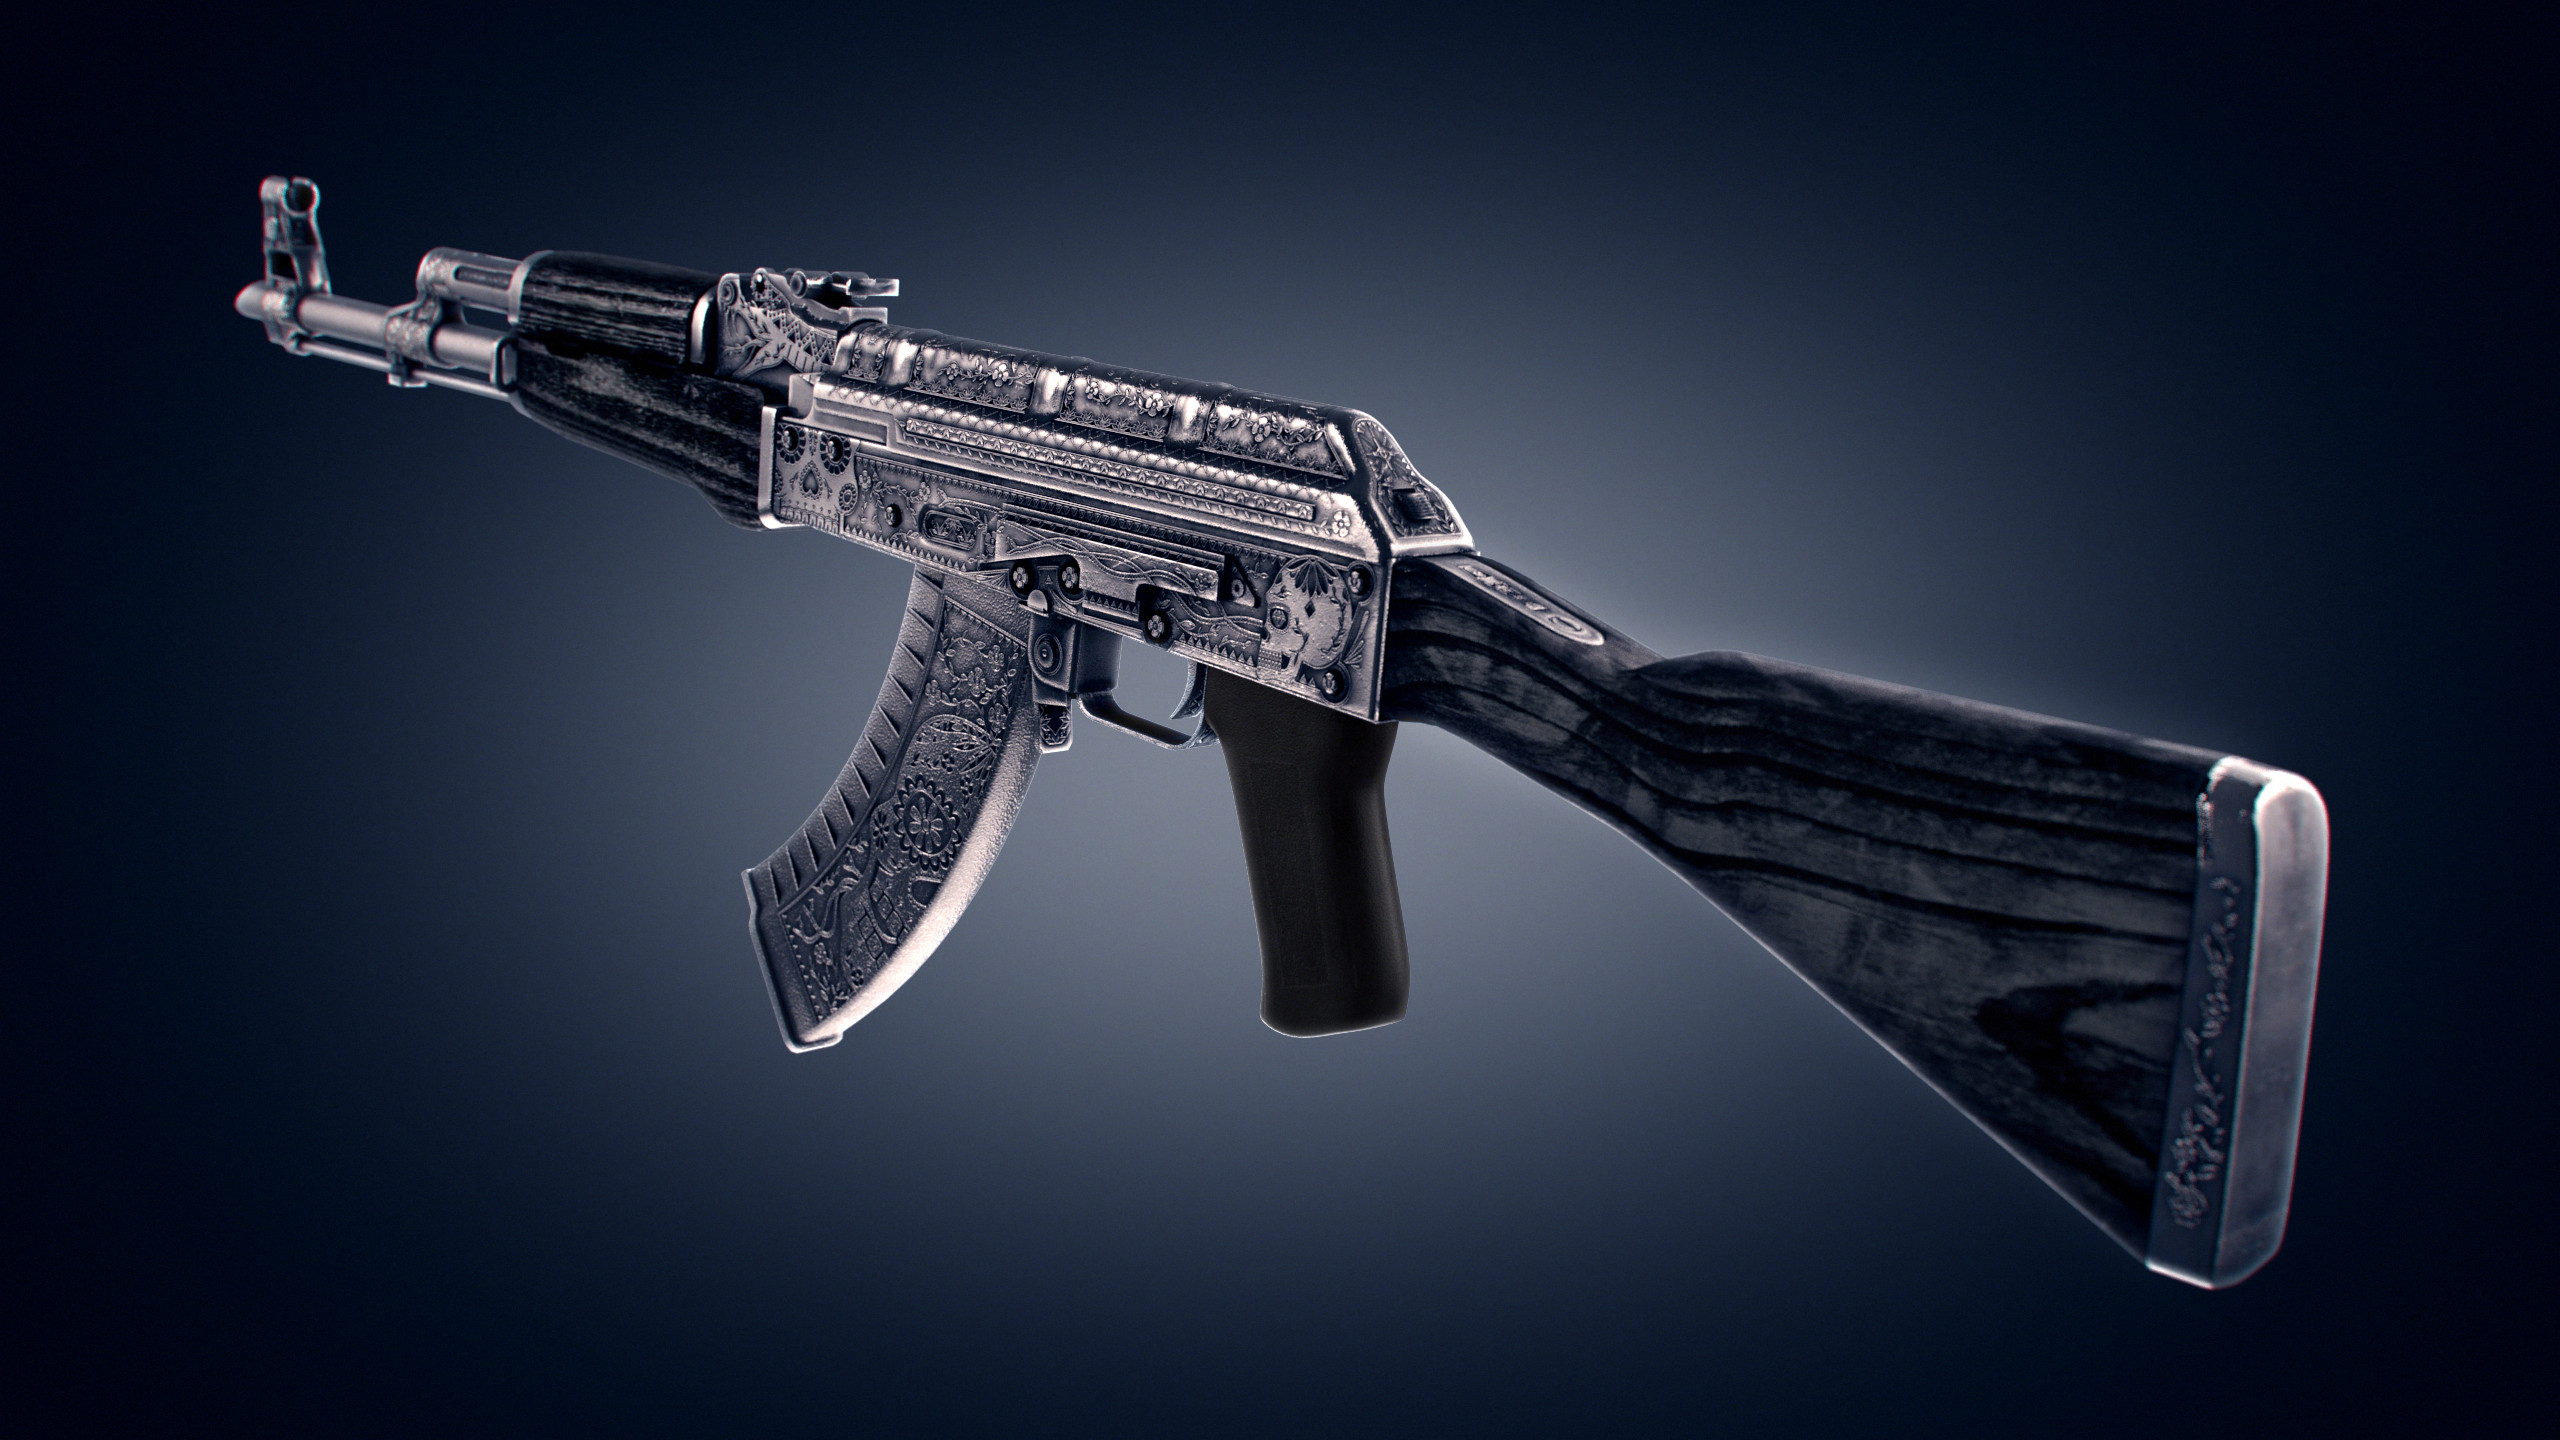 My First Cs Go Weapon Skin 3d Render Ak Cartel Inspired By